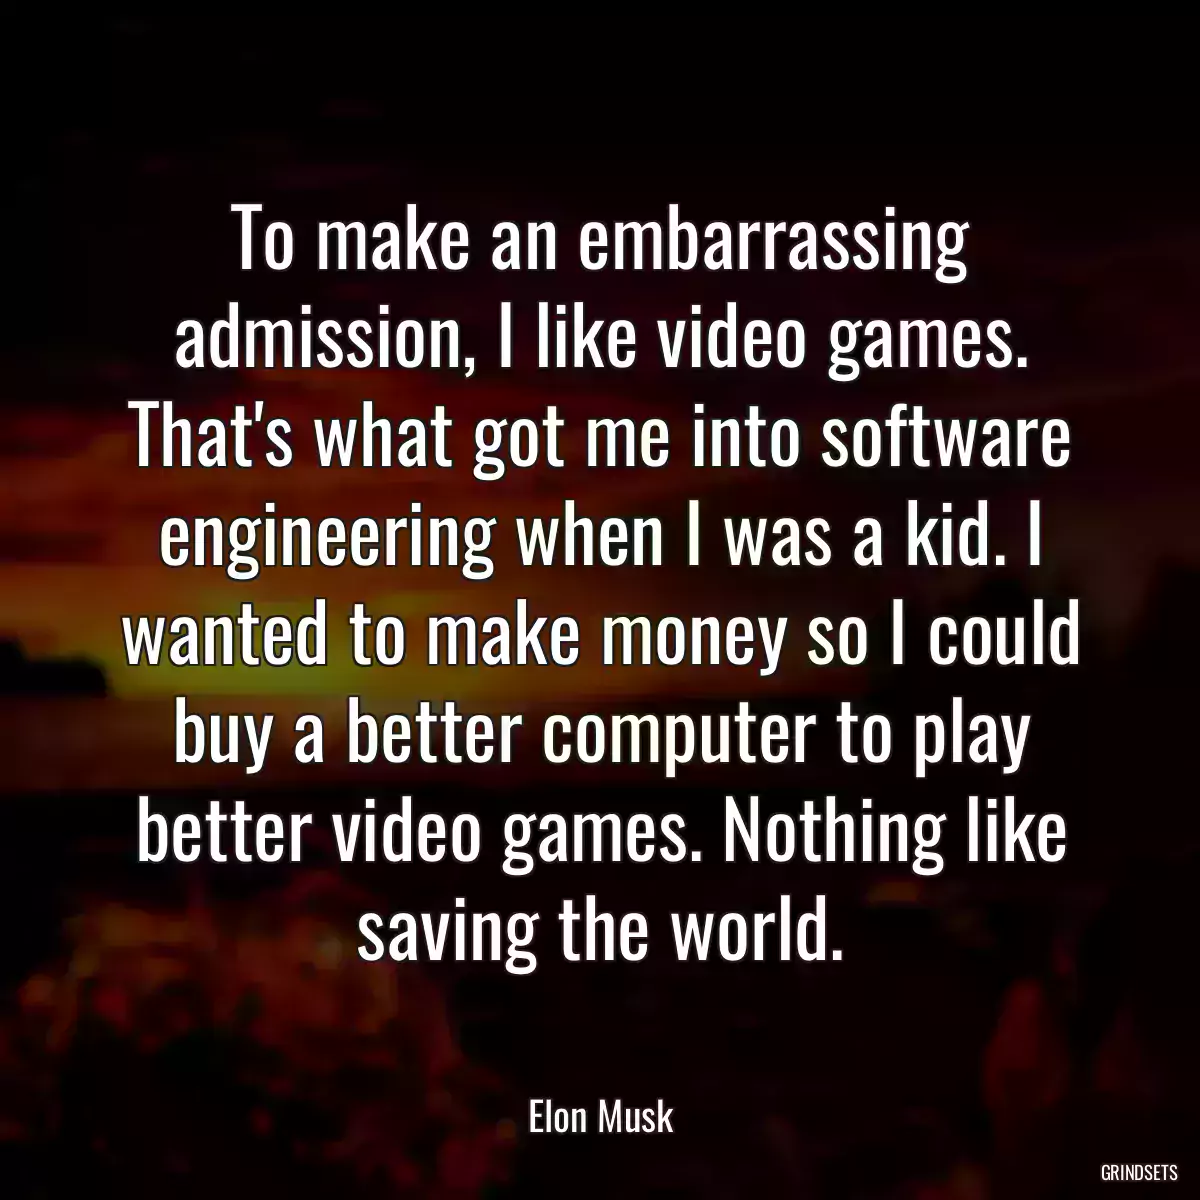 To make an embarrassing admission, I like video games. That\'s what got me into software engineering when I was a kid. I wanted to make money so I could buy a better computer to play better video games. Nothing like saving the world.